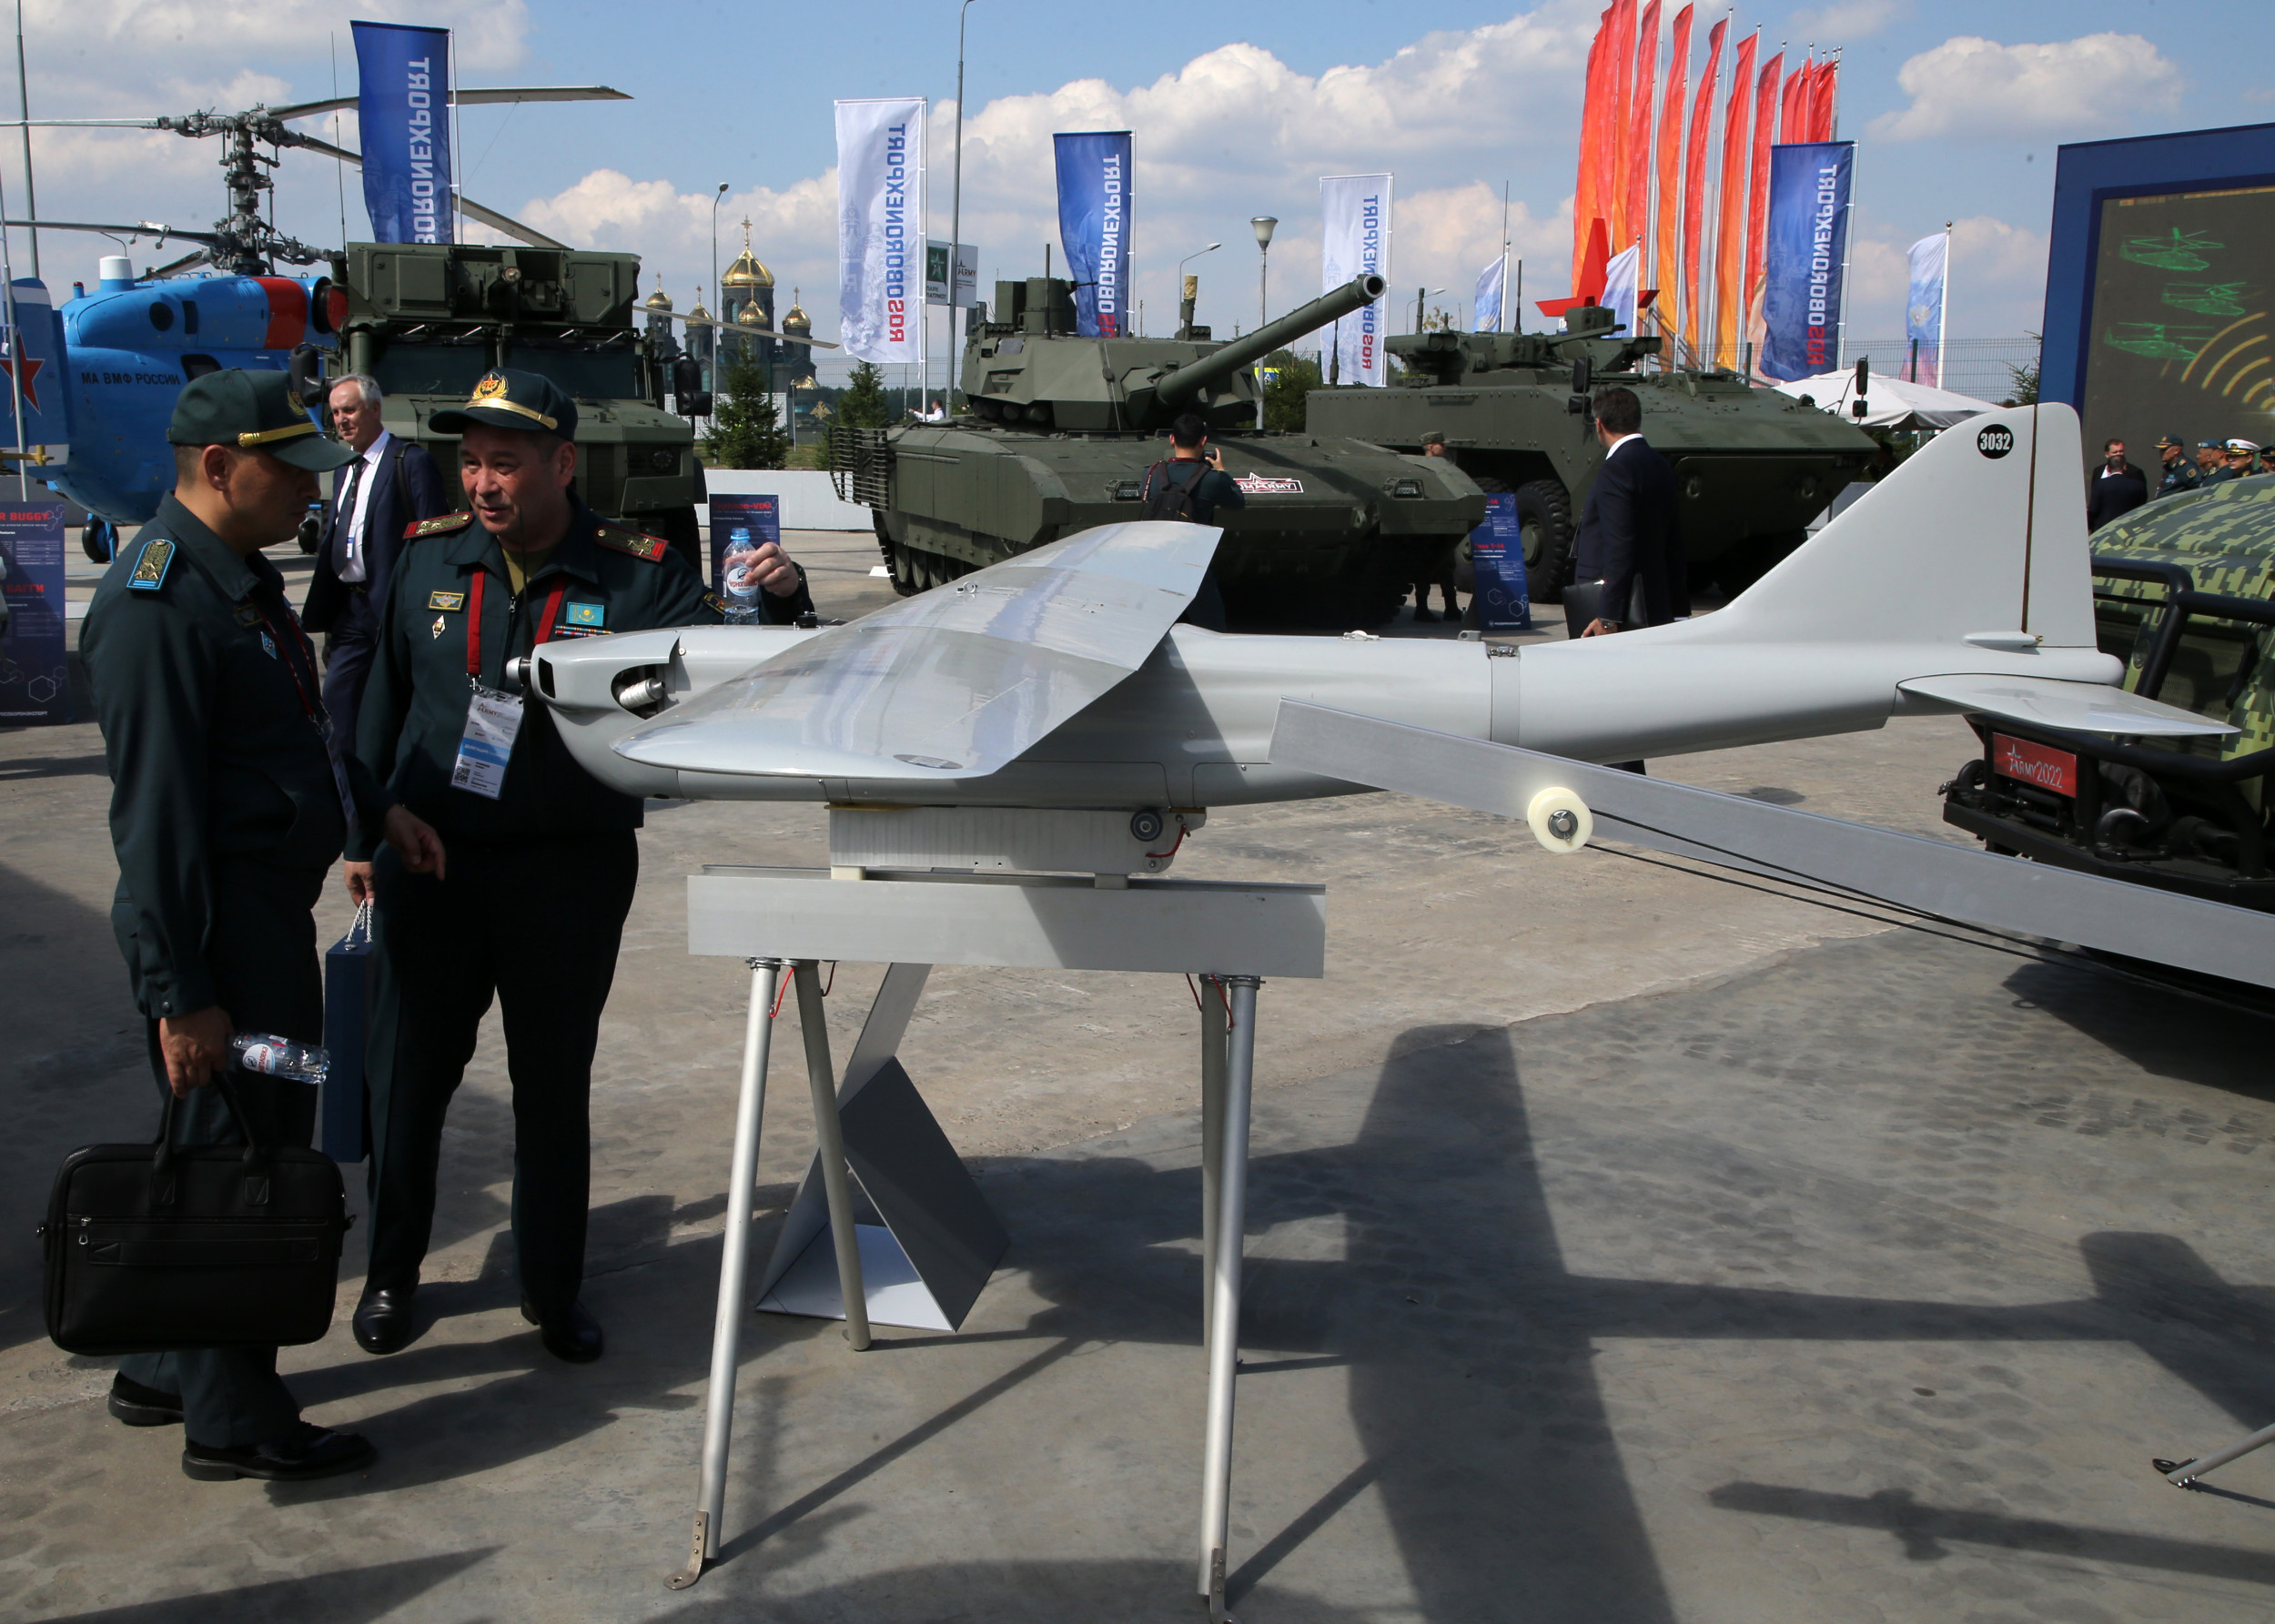 New Counter-Drone System Shows U.S. Has Ukraine’s Back ‘Over the Long Term’ – Newsweek